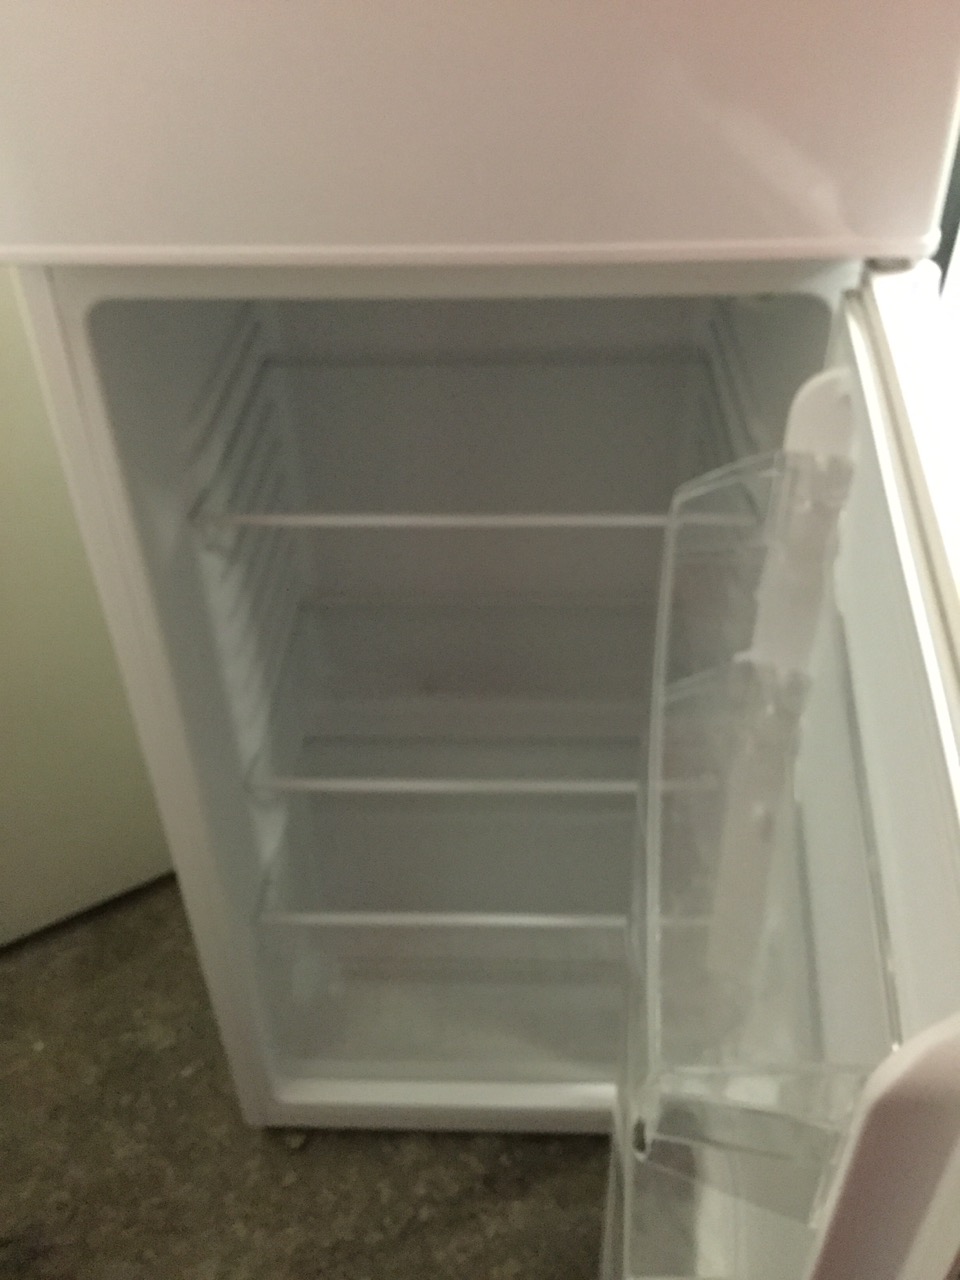 A square Fridgemaster fridge freezer with two doors. (22in x 22in x 56.75in) - Image 3 of 3